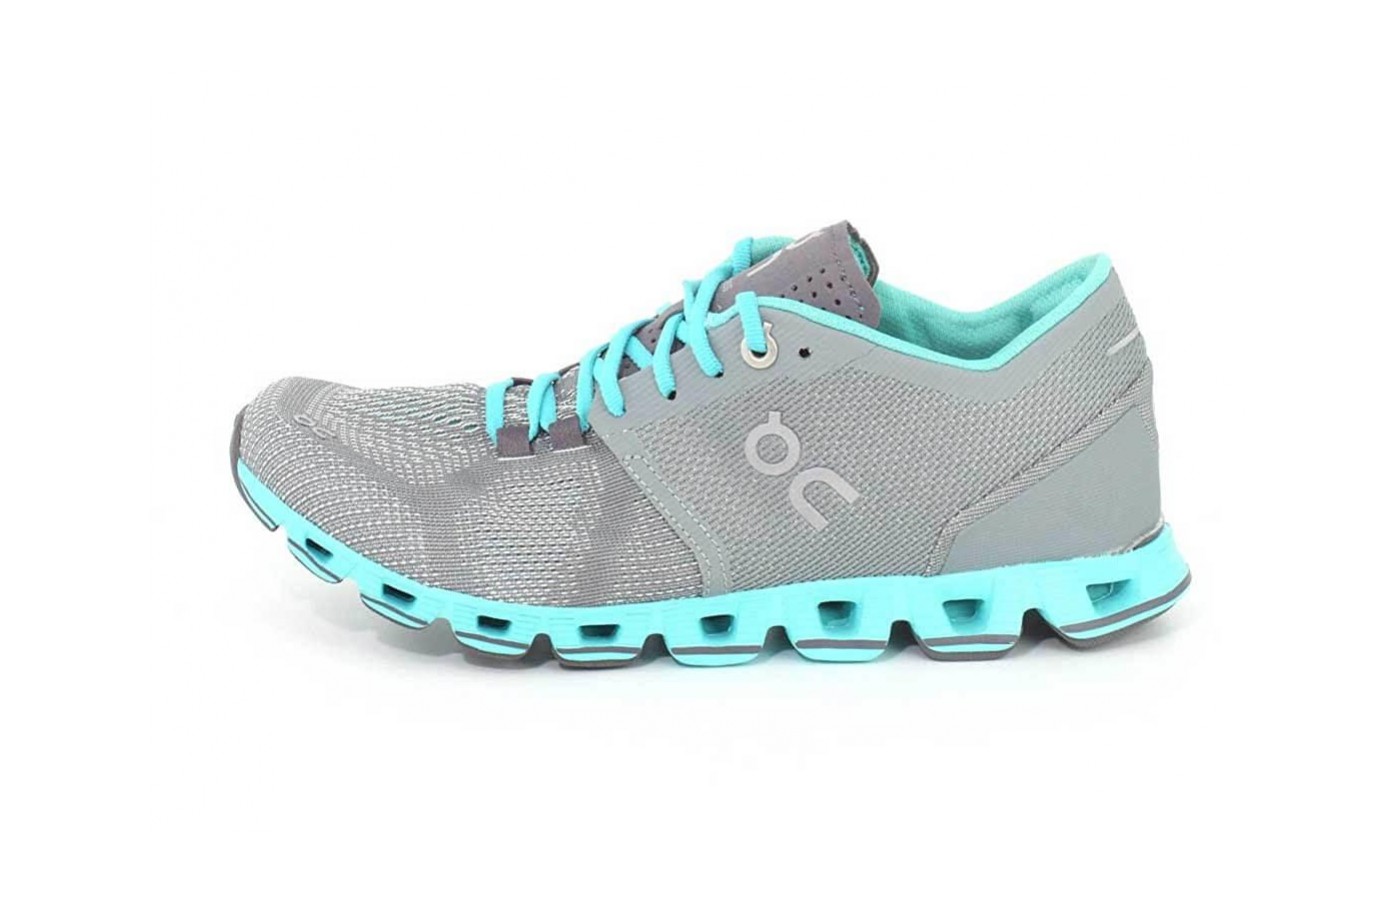 The On Cloud X features a CloudTec outsole 